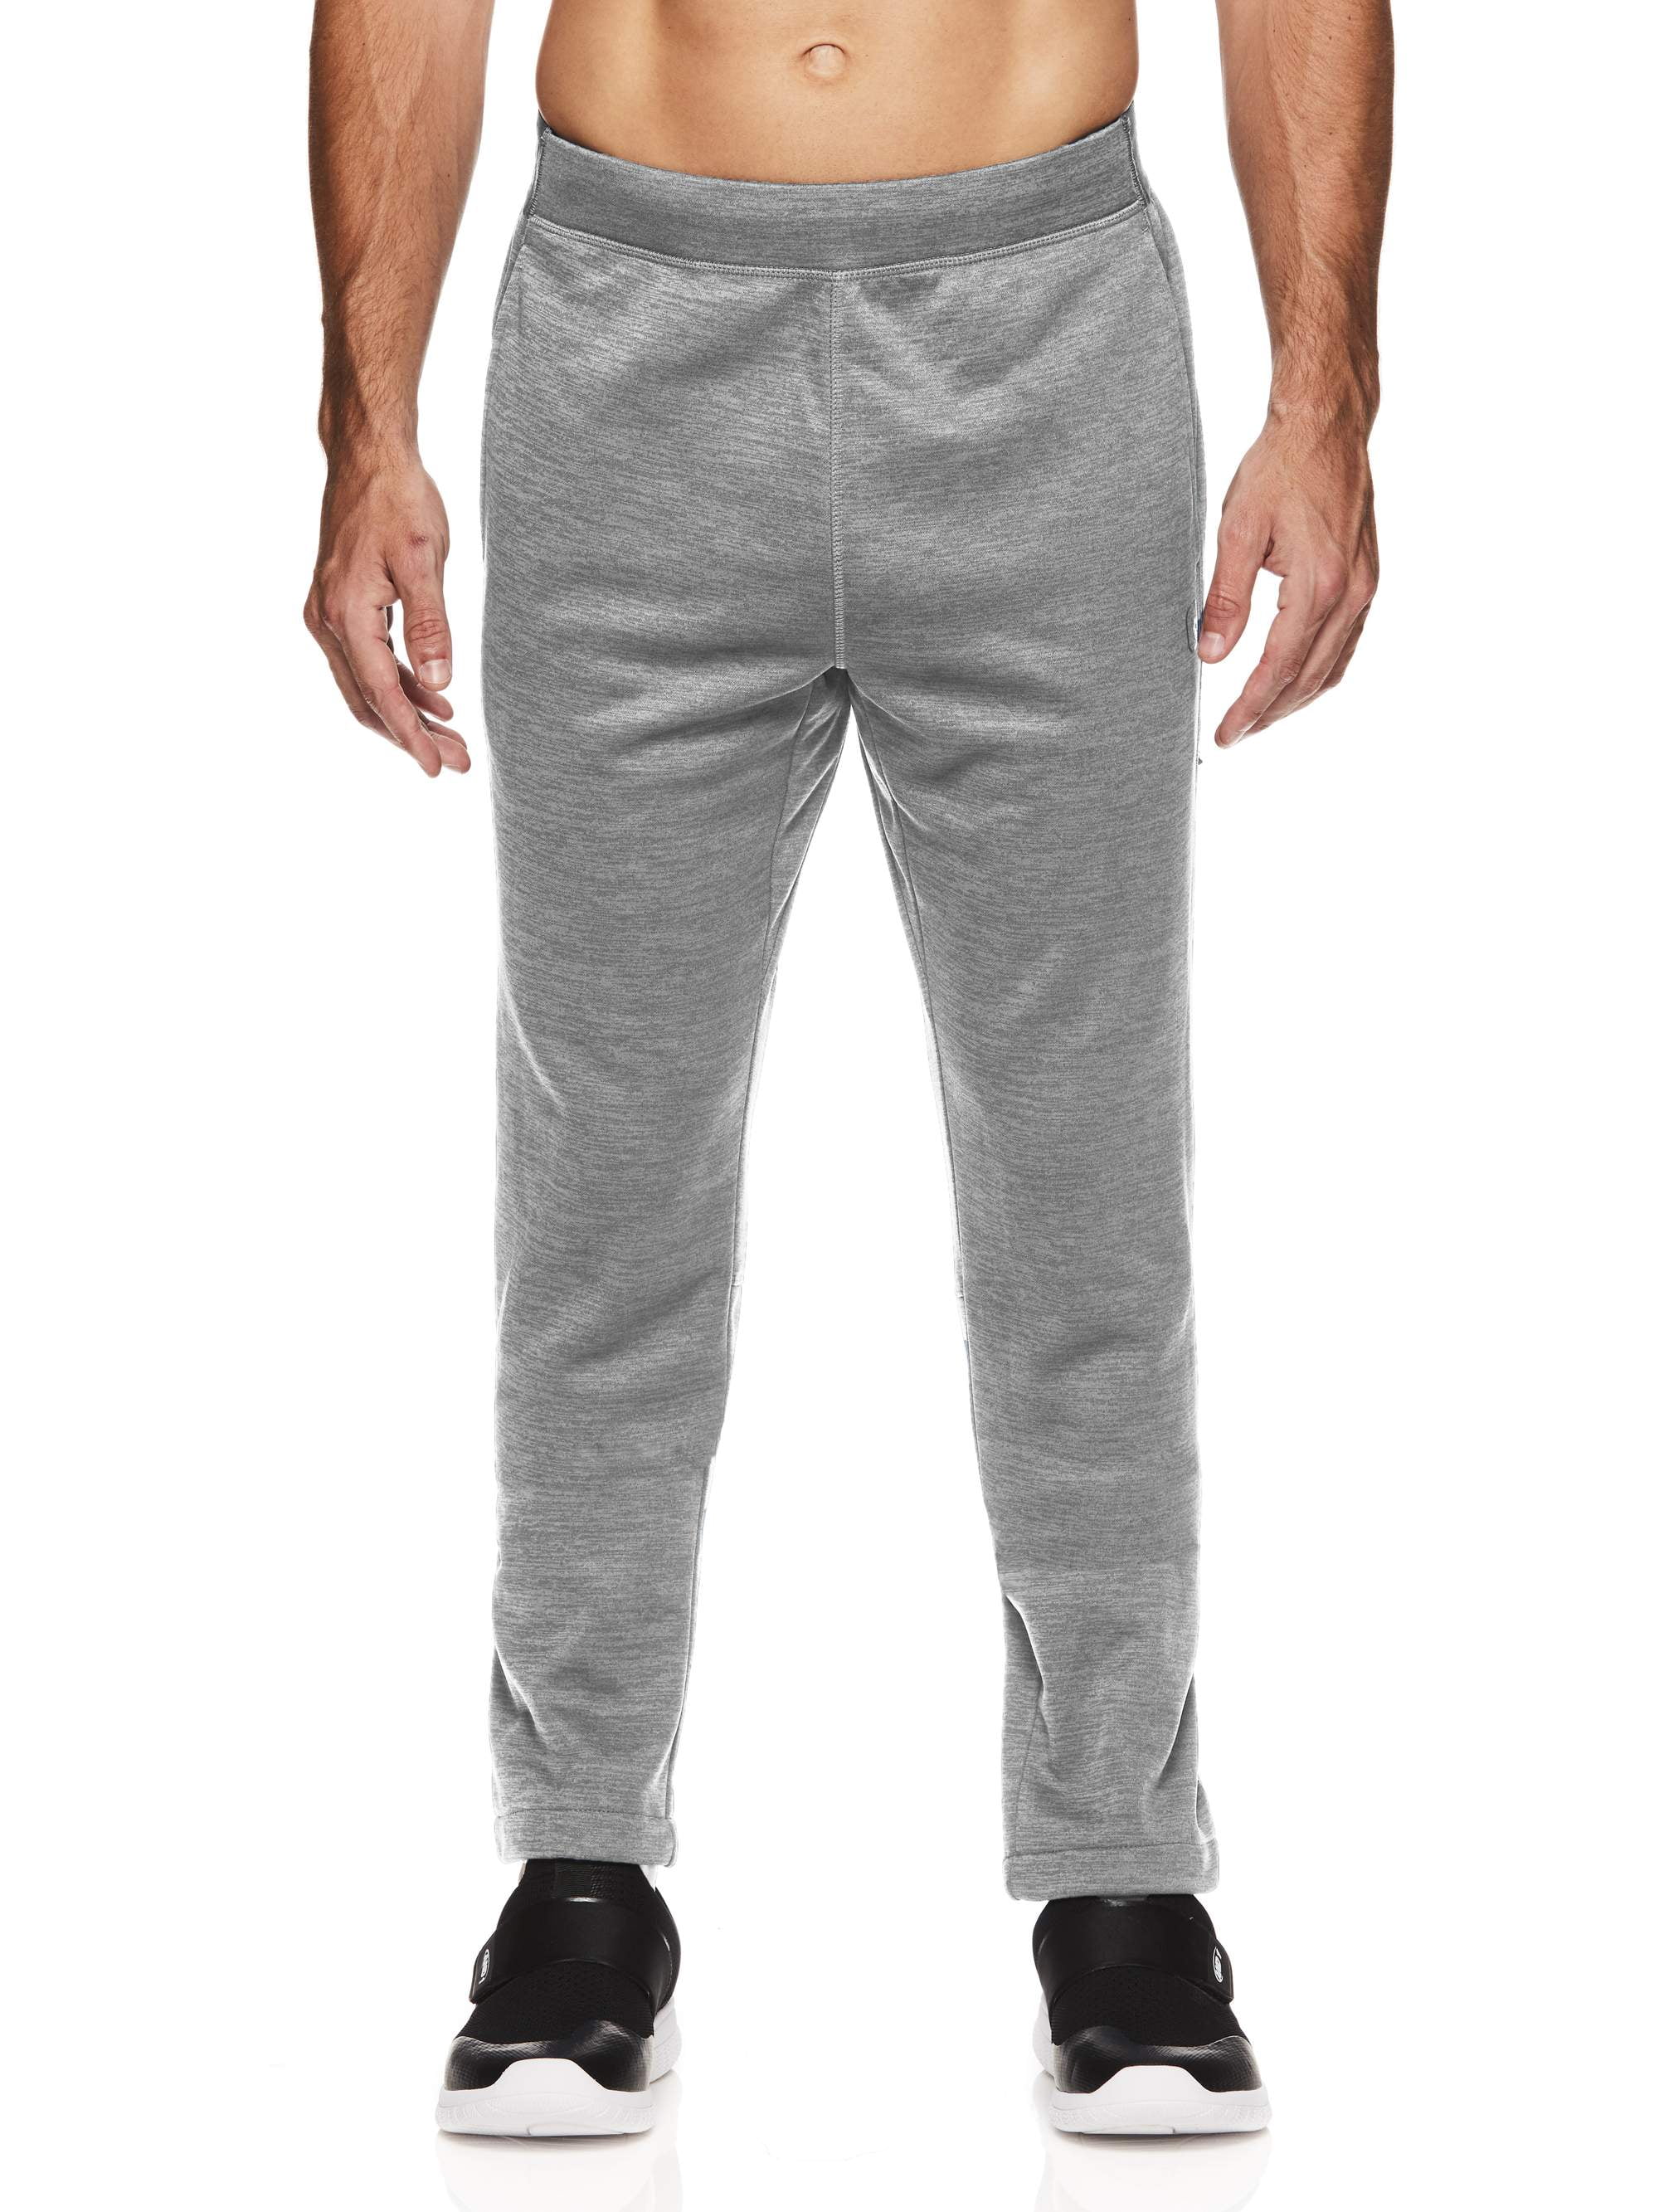 AND1 Men's and Big Men's Active Fleece Performance Pants, up to Size ...